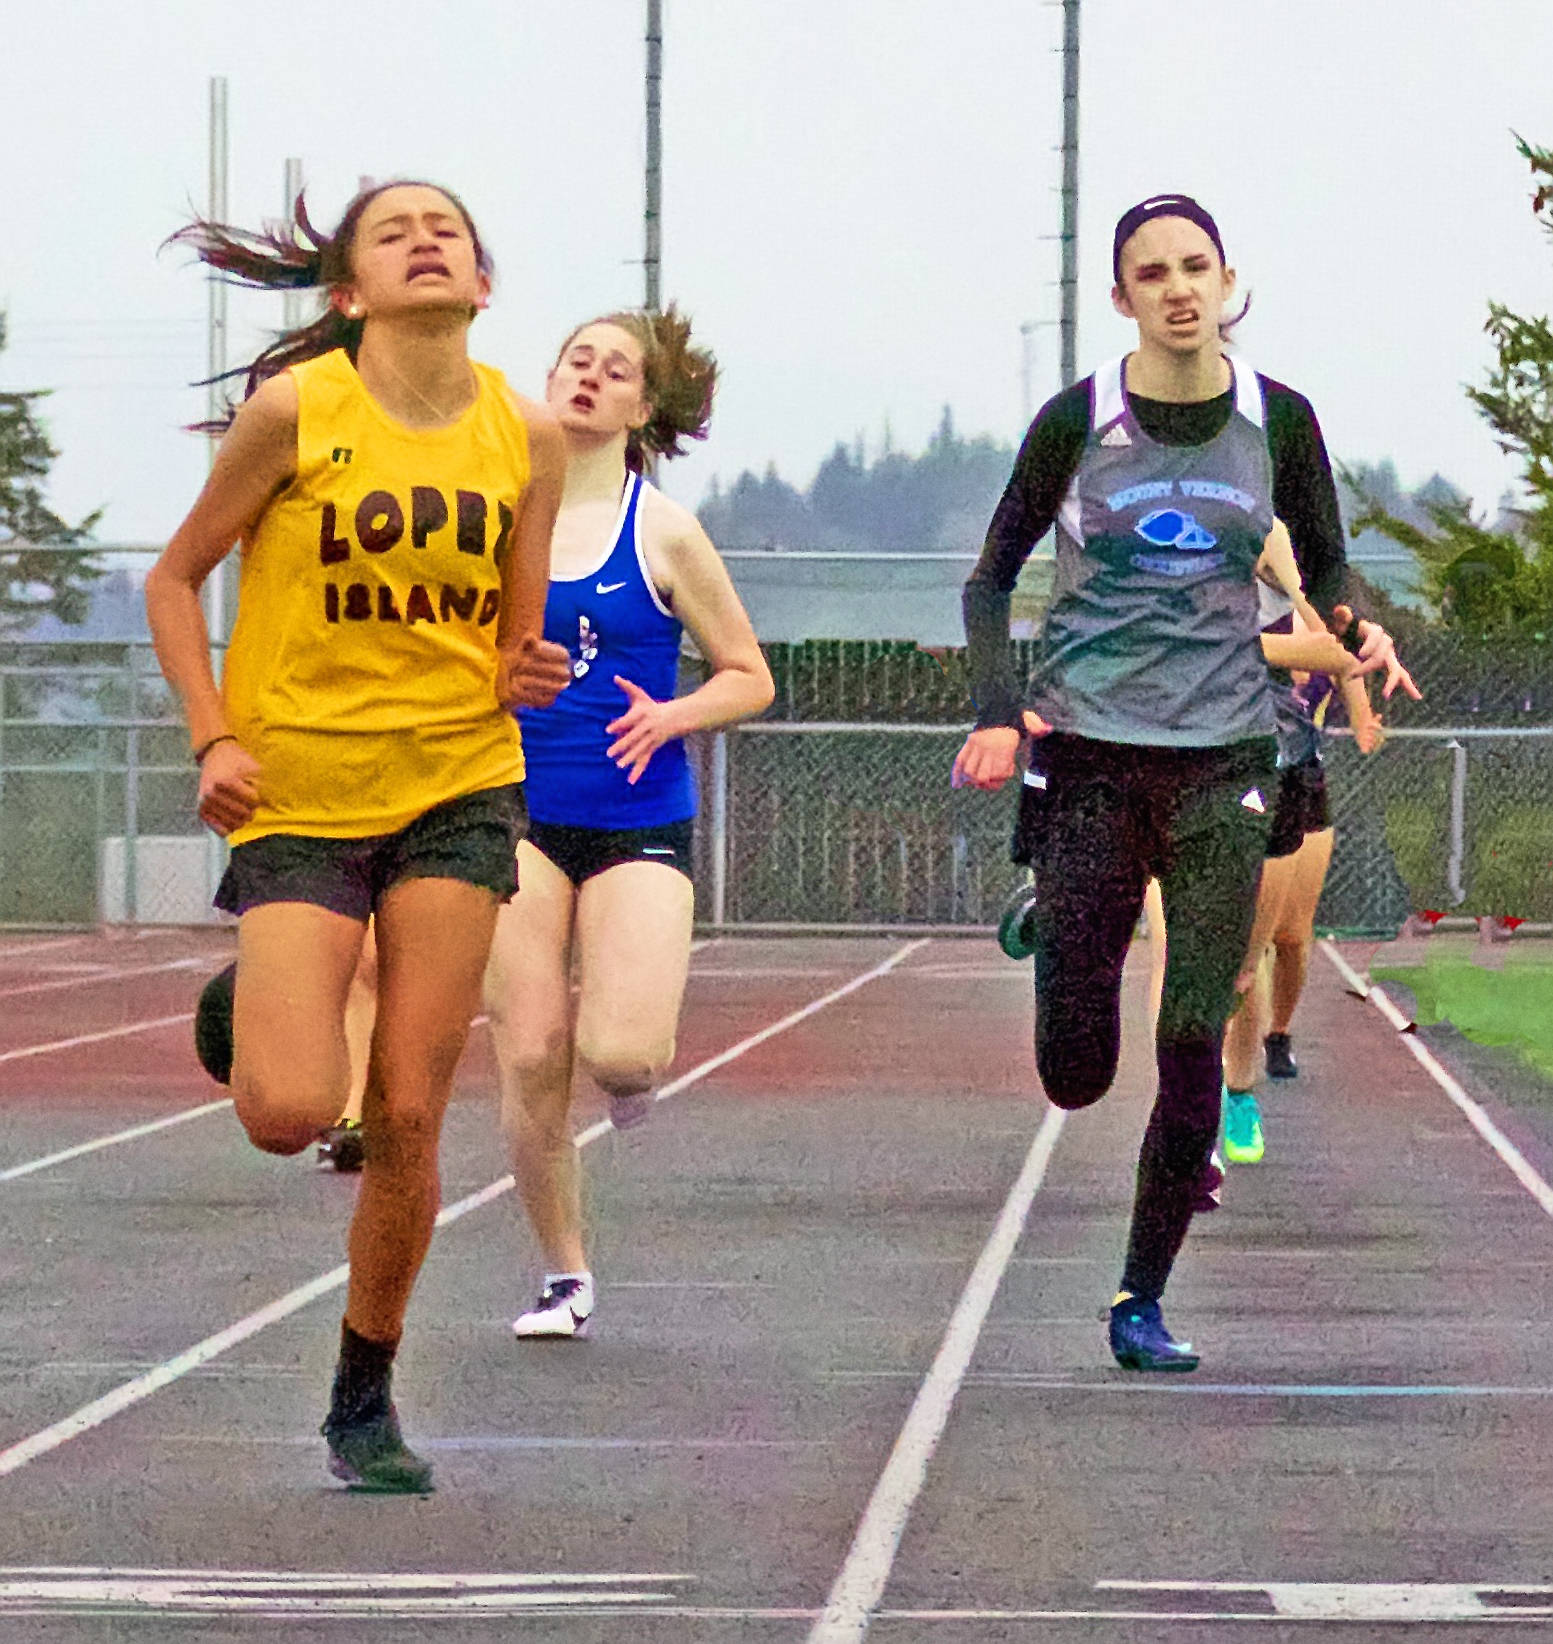 Contributed photo/Gene Helfman                                Leah Armstrong finishes ahead of the field in the 800-meter run at the Mount Vernon Christian track meet April 18<sup></sup>. Armstrong’s time of 2:37.89 is the fourth fastest in the league this year.